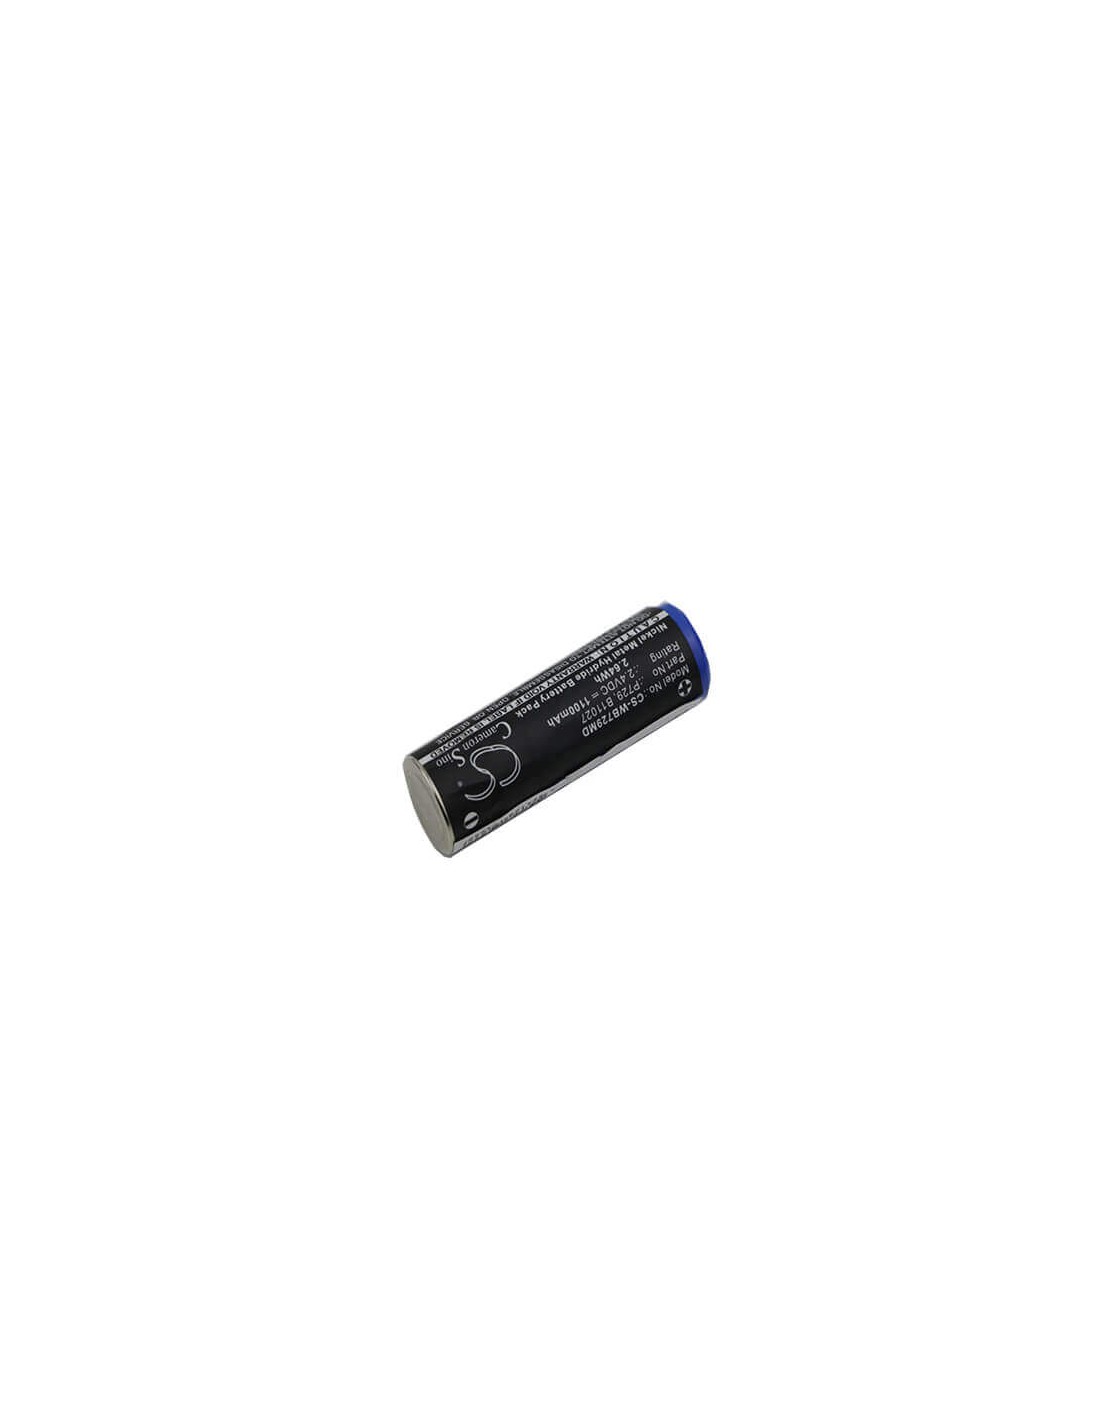 Battery for Welch-allyn, Microtymp 2, 72900 2.4V, 1100mAh - 2.64Wh